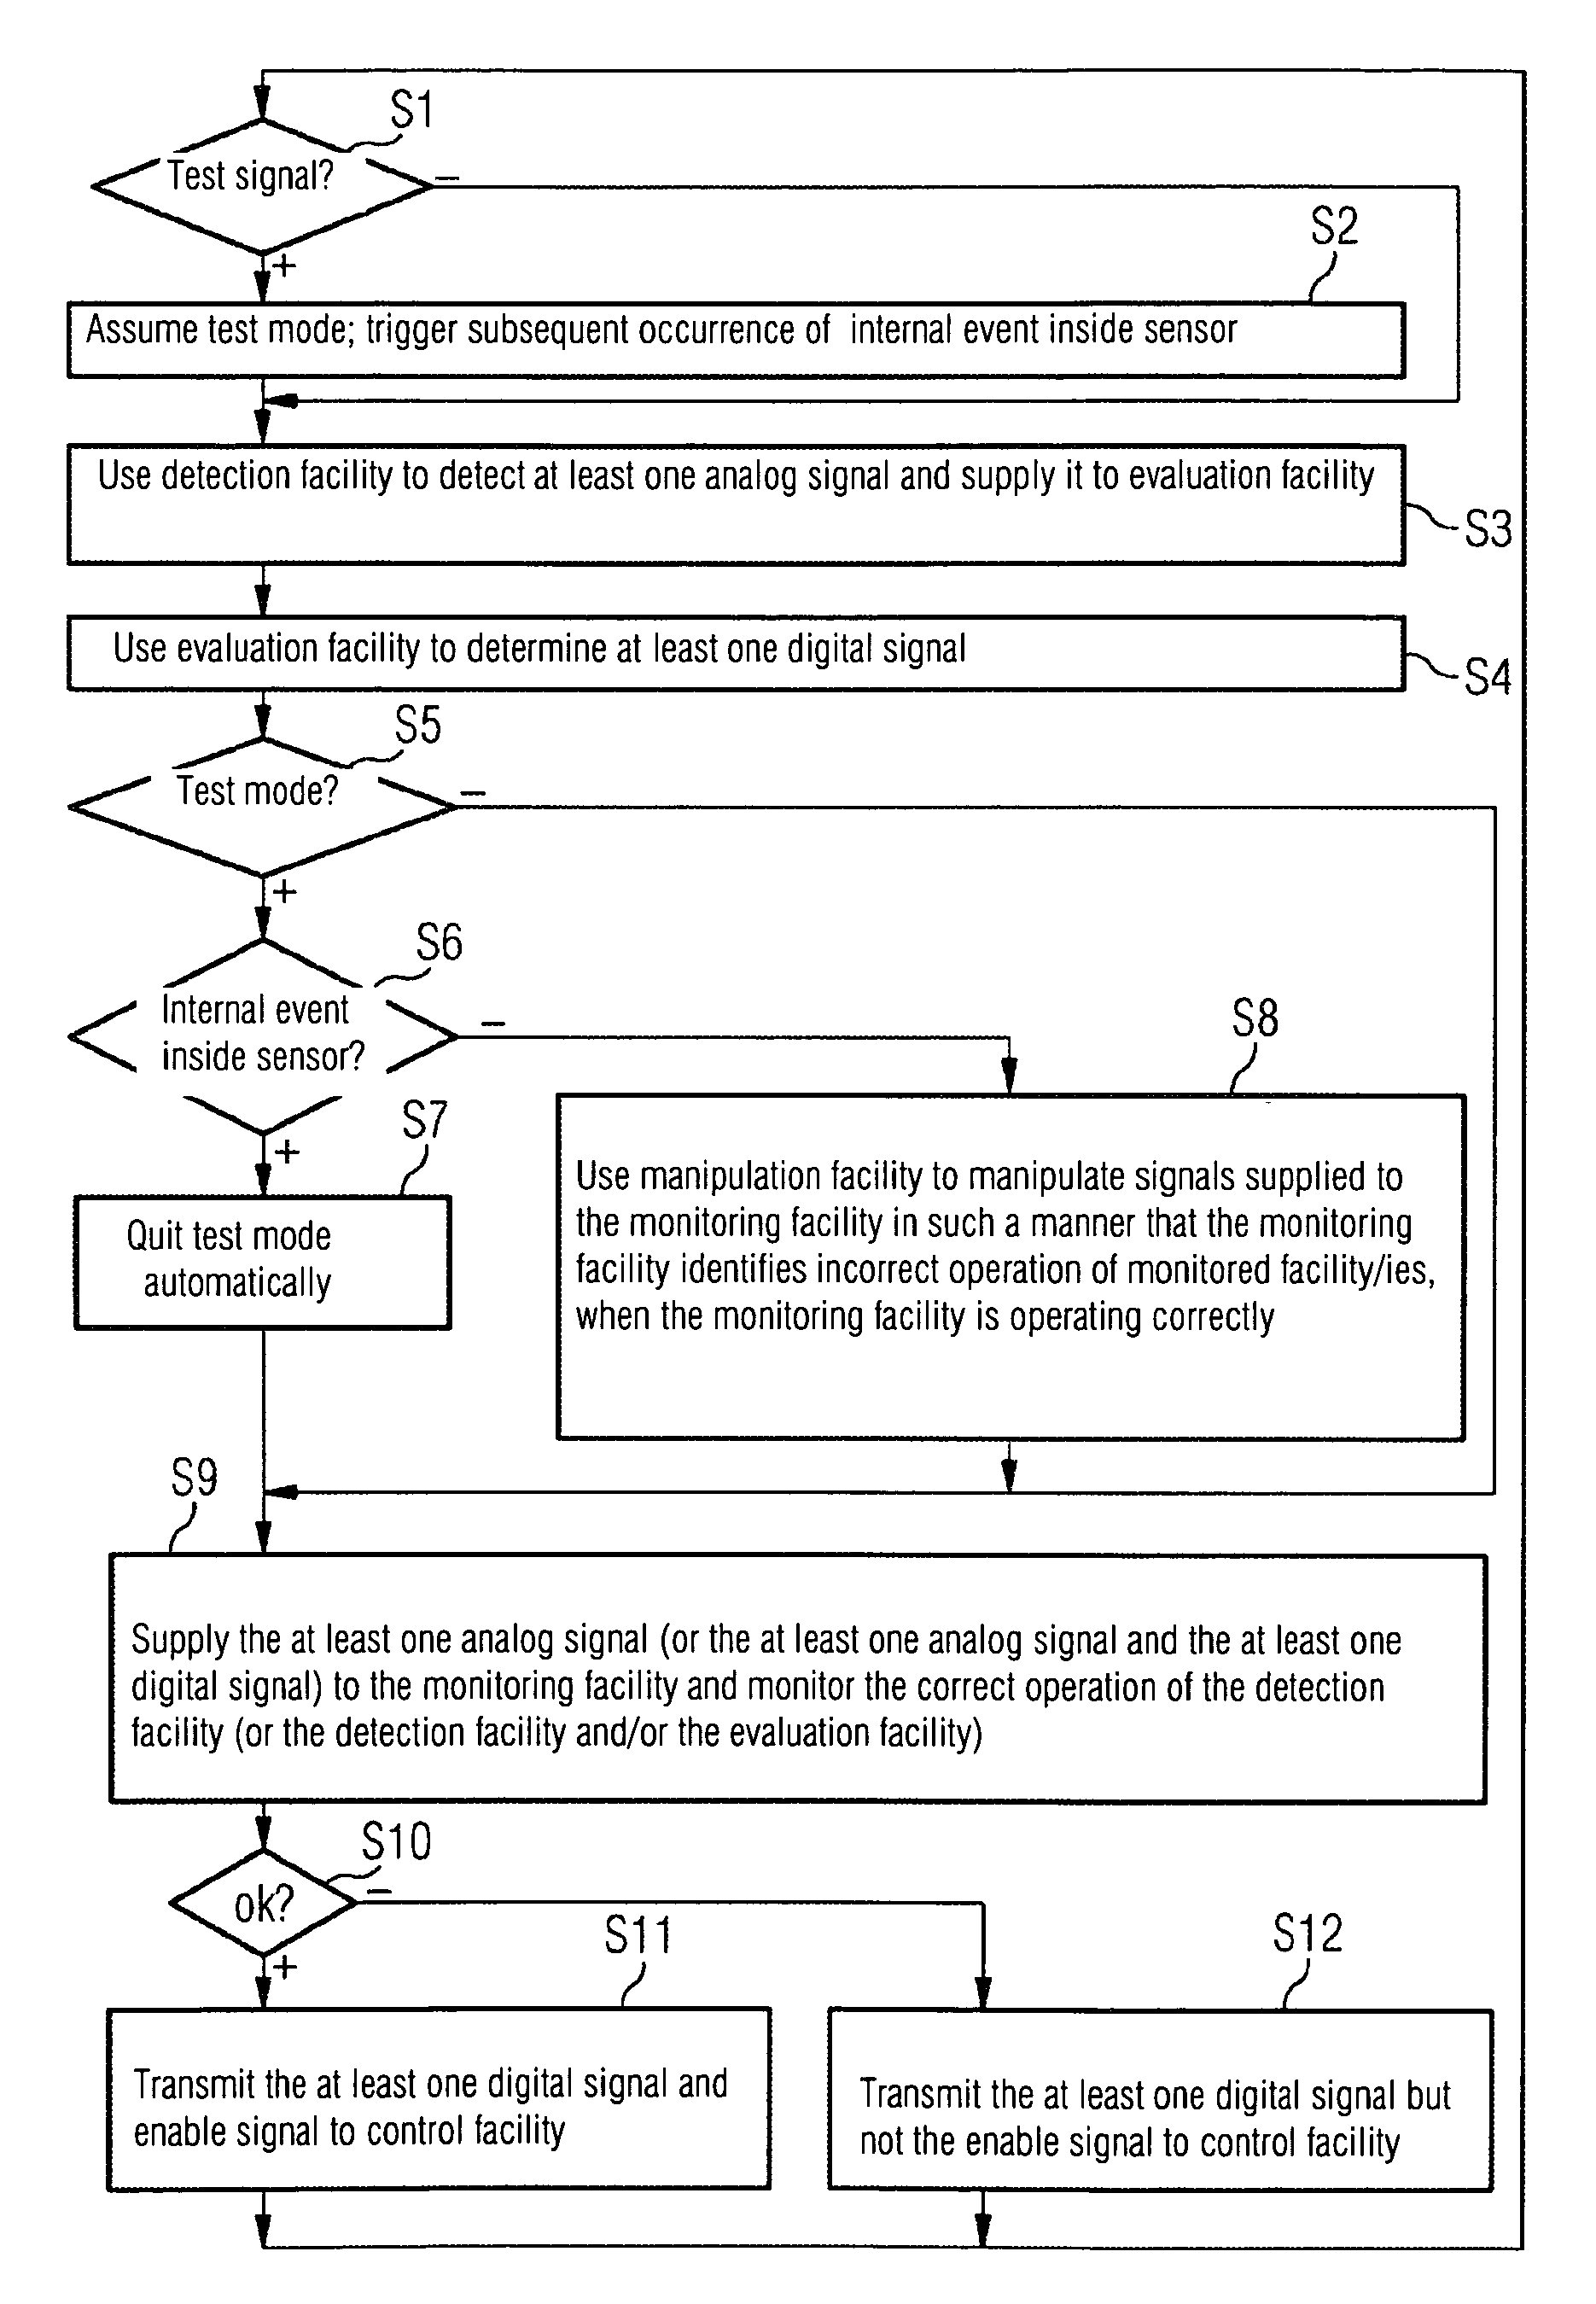 Operating method for a sensor and a control facility communicating with the sensor